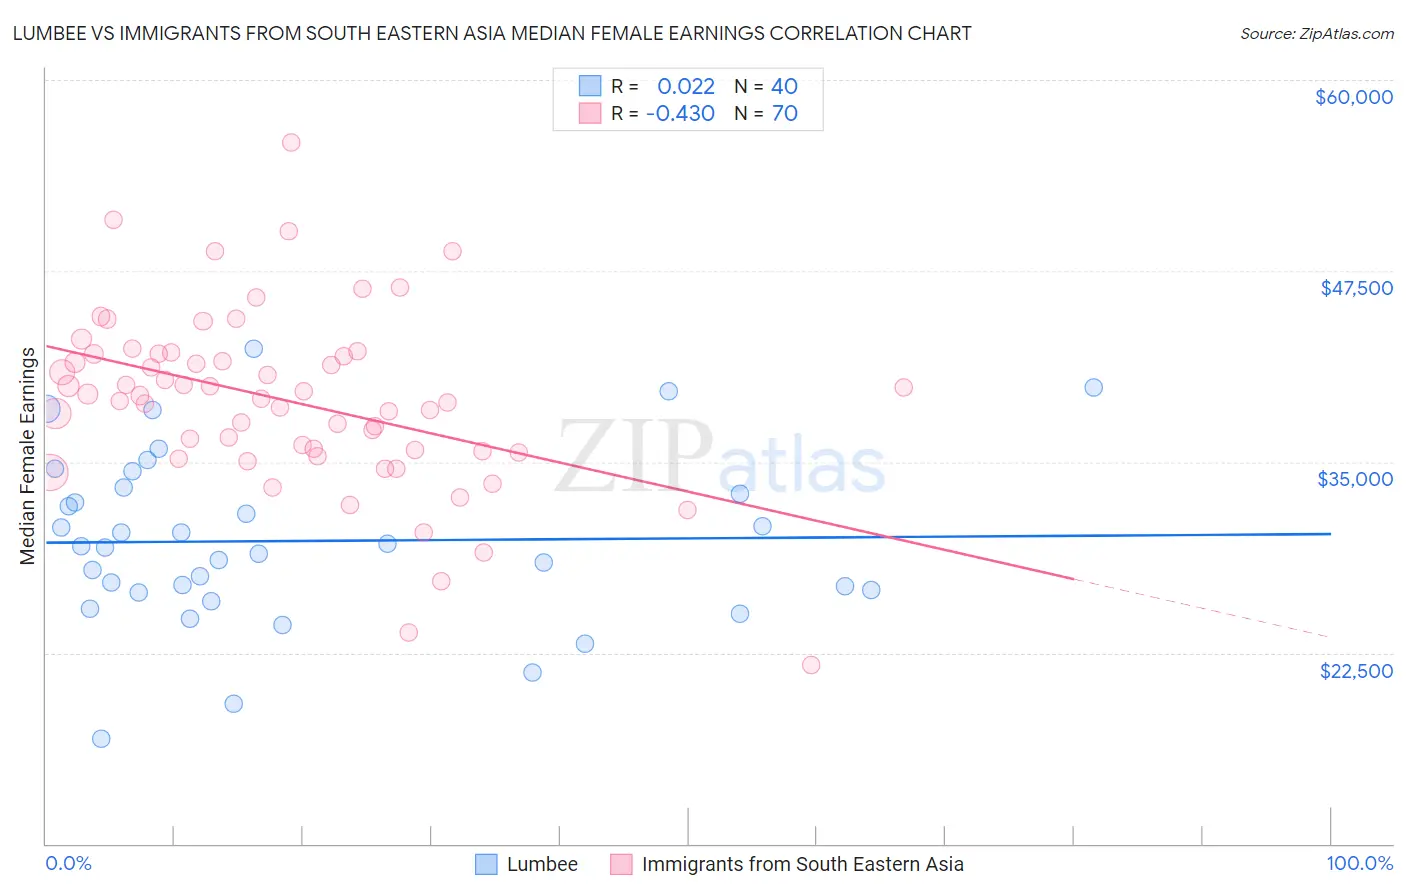 Lumbee vs Immigrants from South Eastern Asia Median Female Earnings